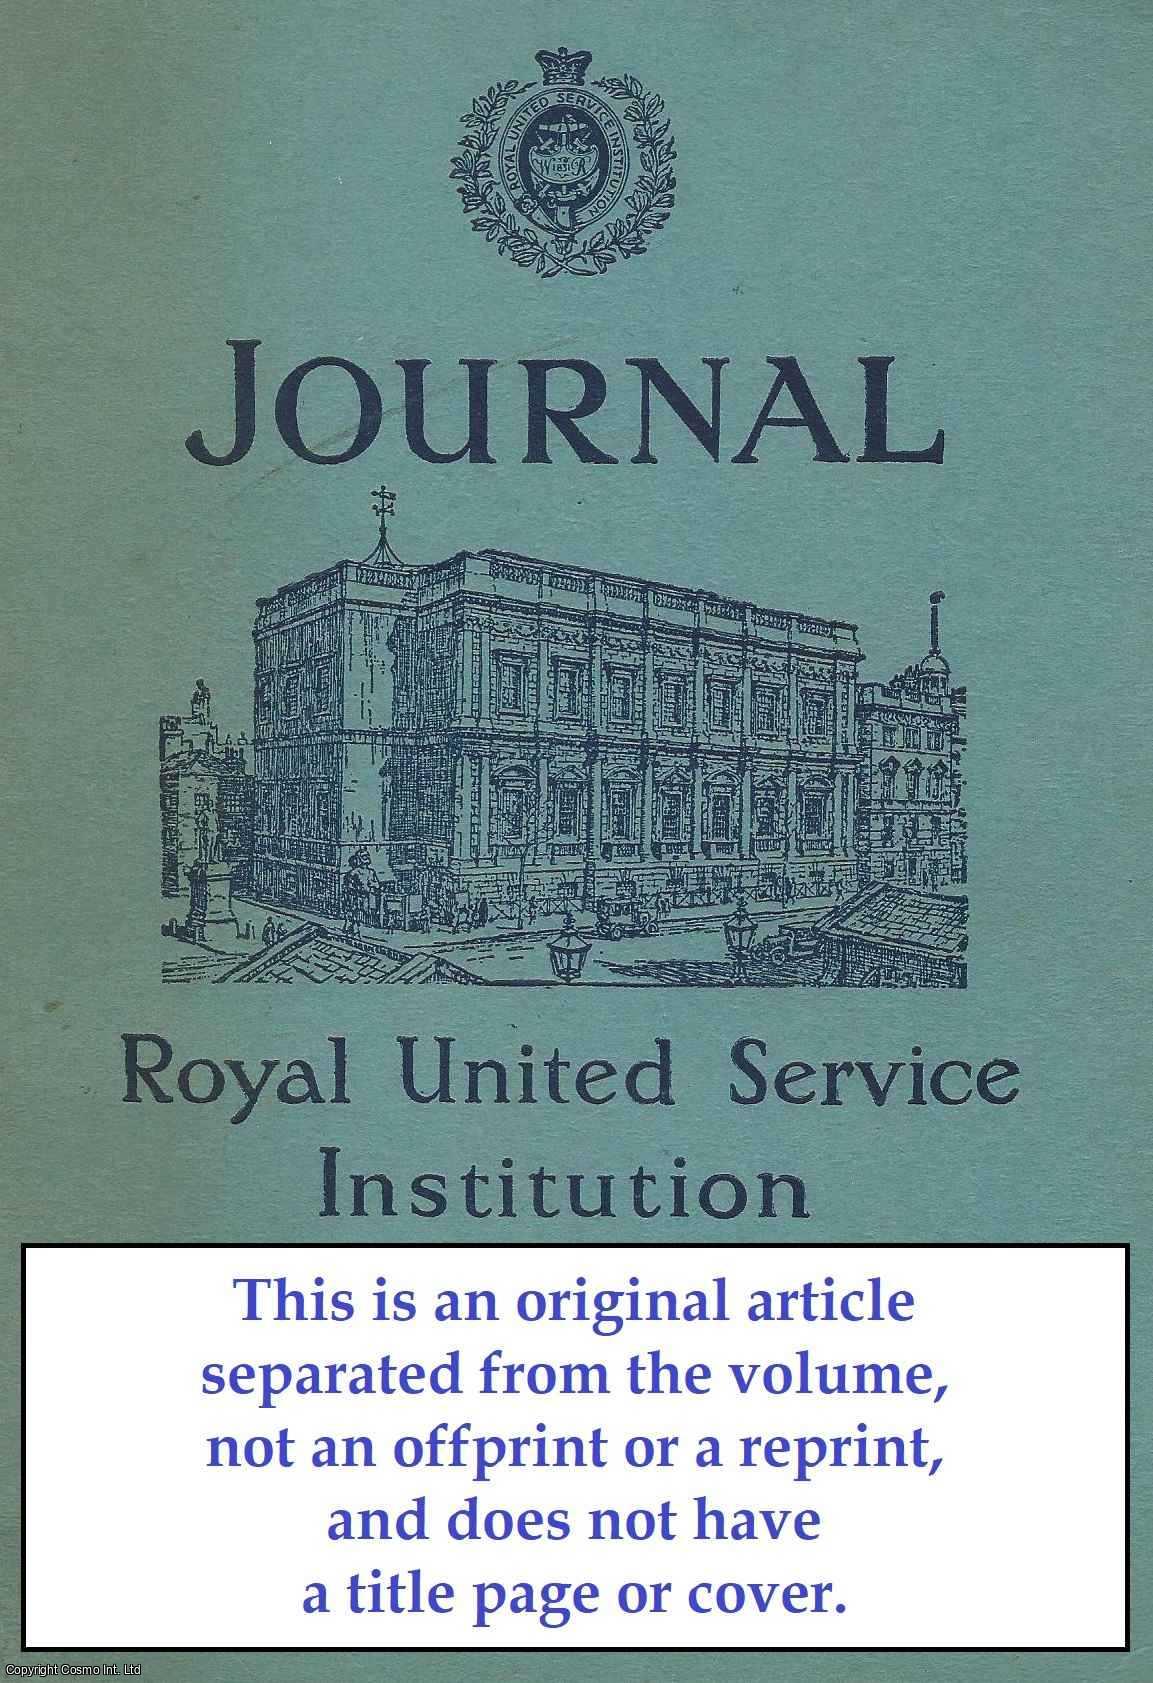 M. J. D'A Blackman - Closure of a Command. An original article from The Royal United Service Institution Journal, 1965.